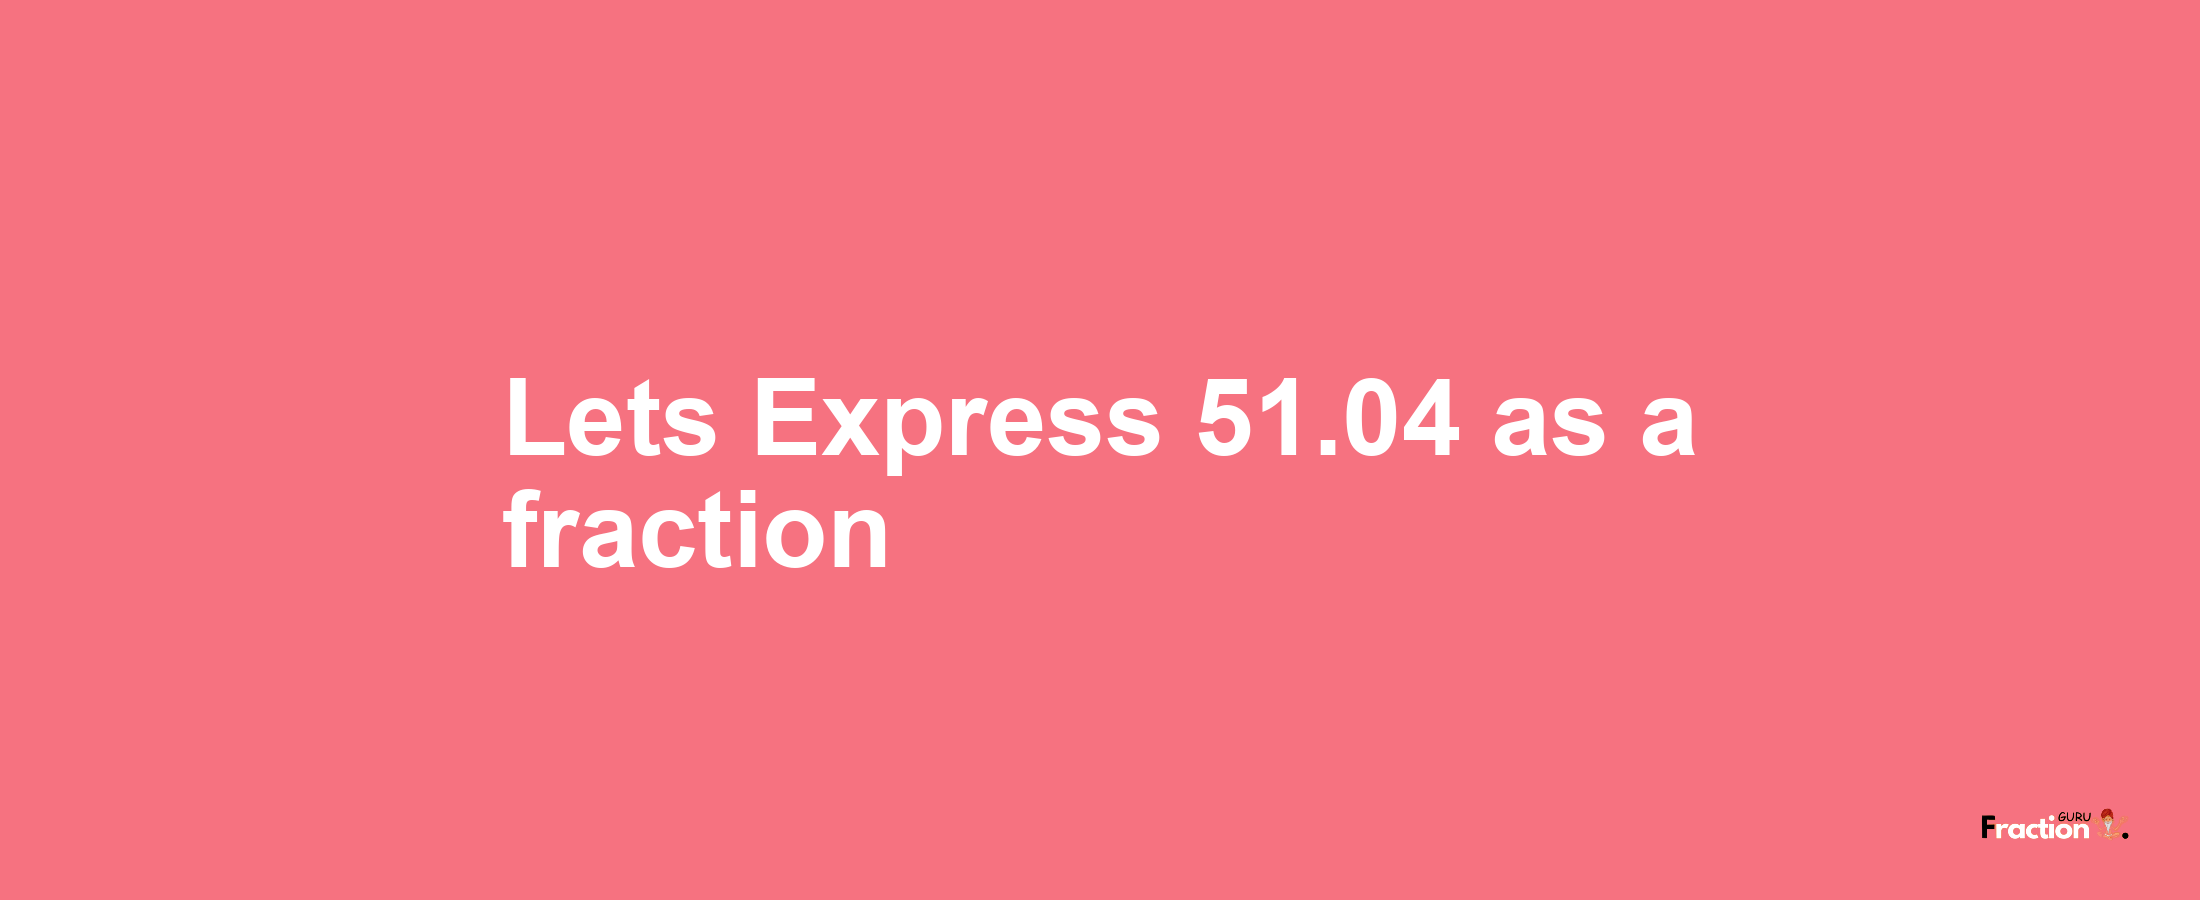 Lets Express 51.04 as afraction